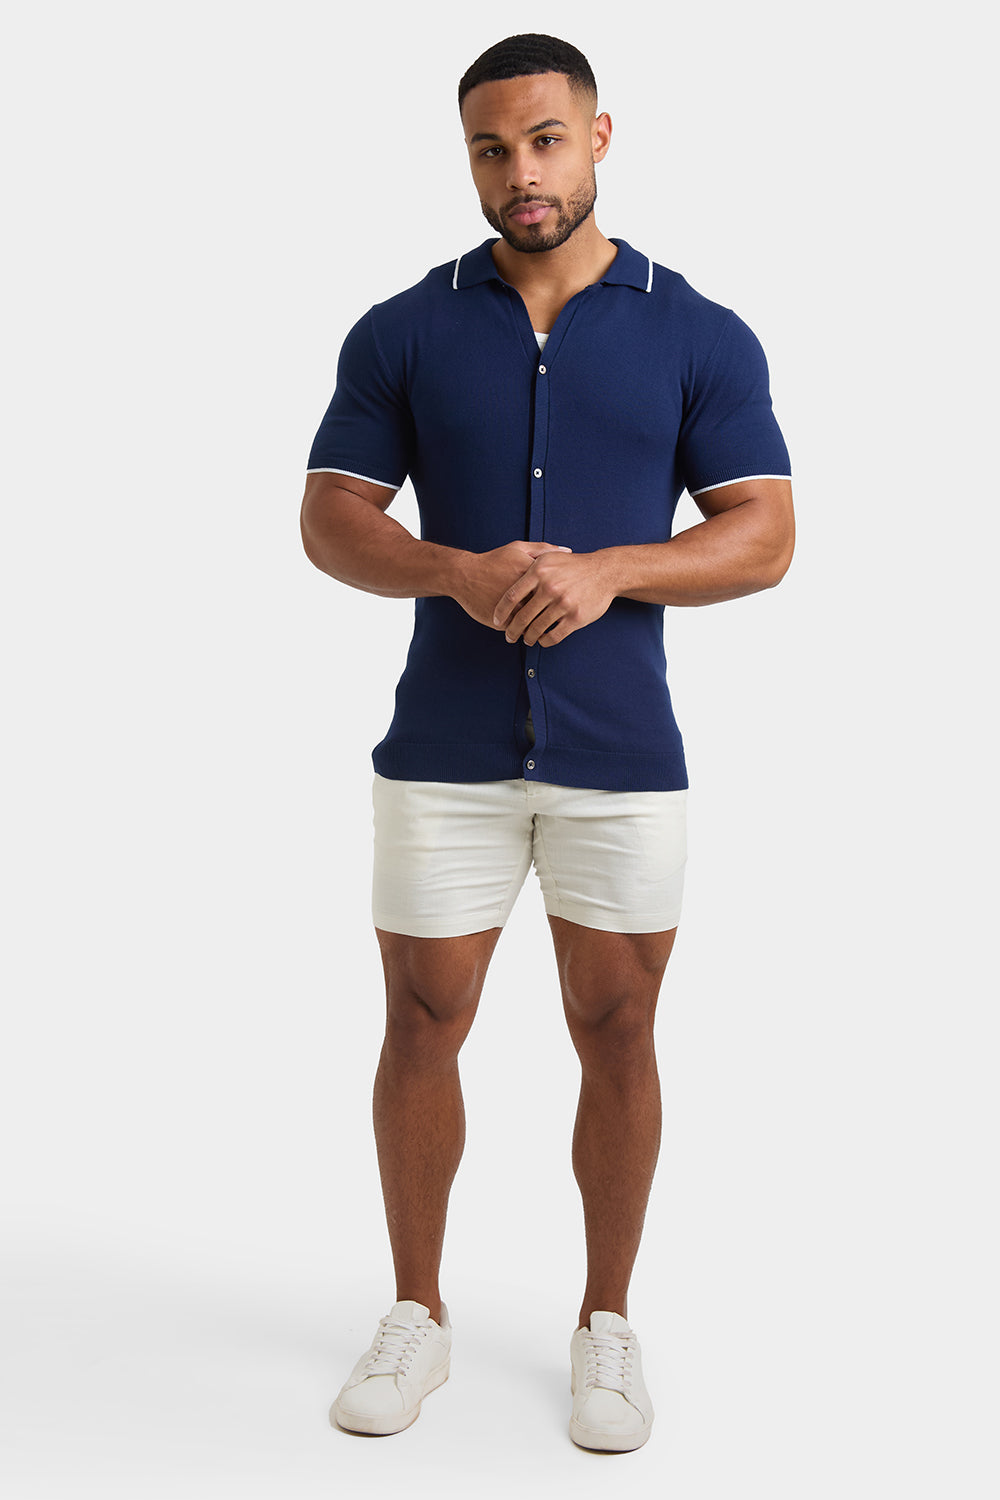 Tipped Knitted Shirt in Navy - TAILORED ATHLETE - ROW